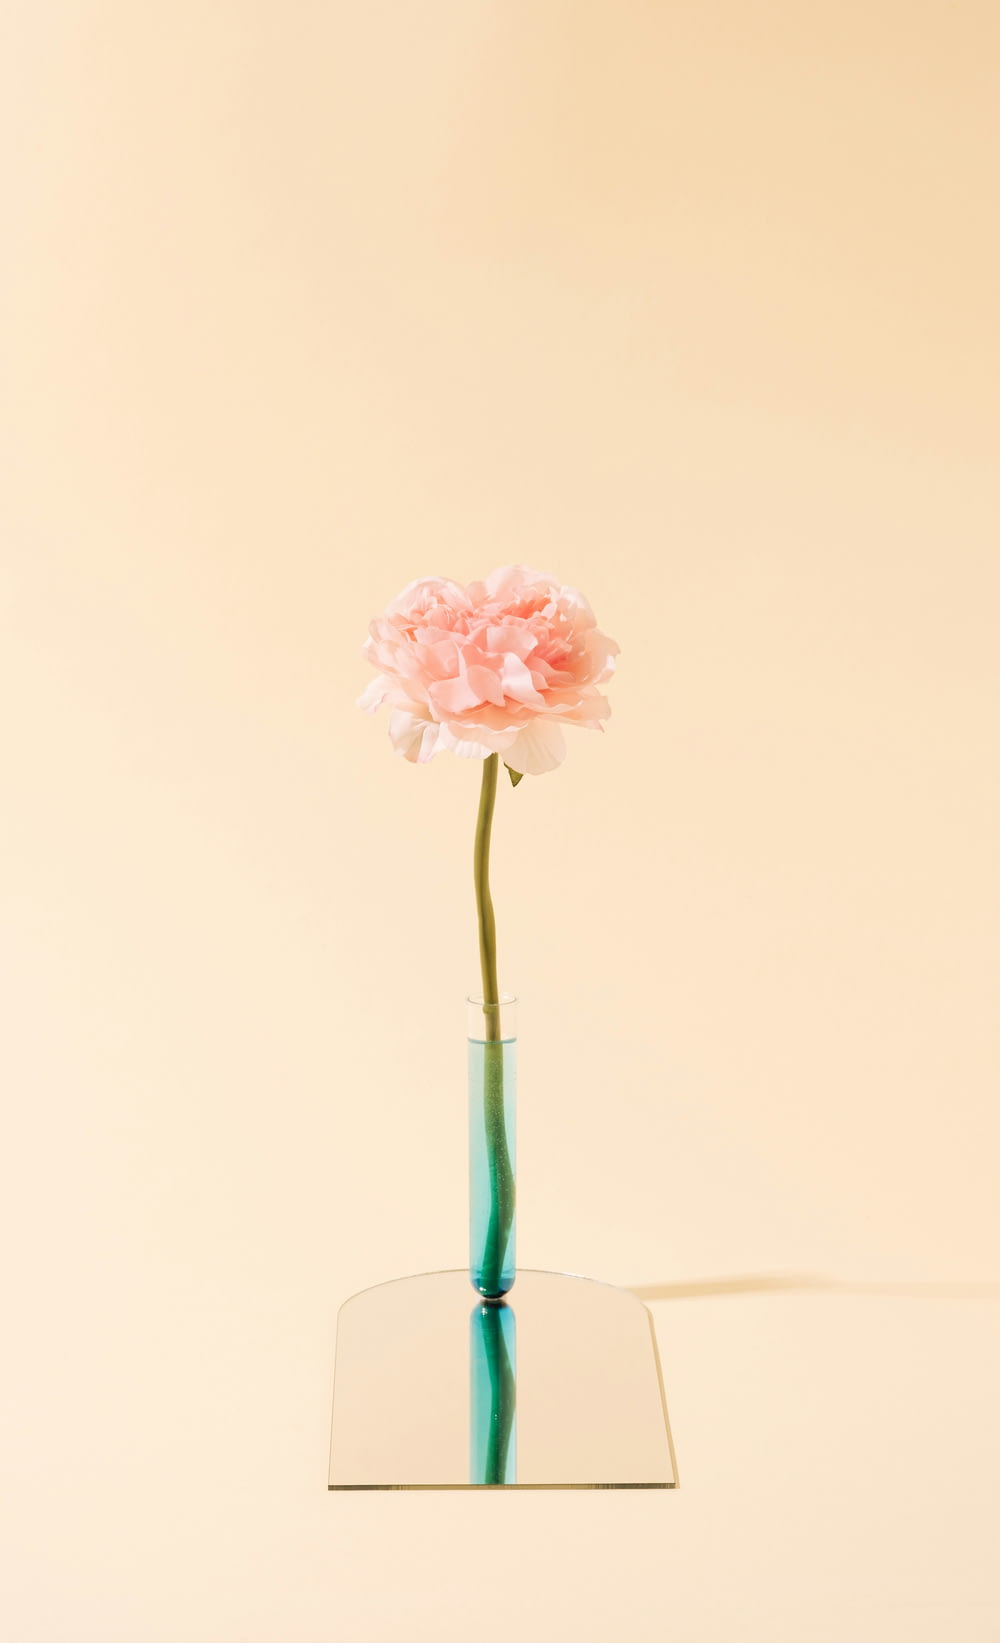 a single pink carnation in a glass vase